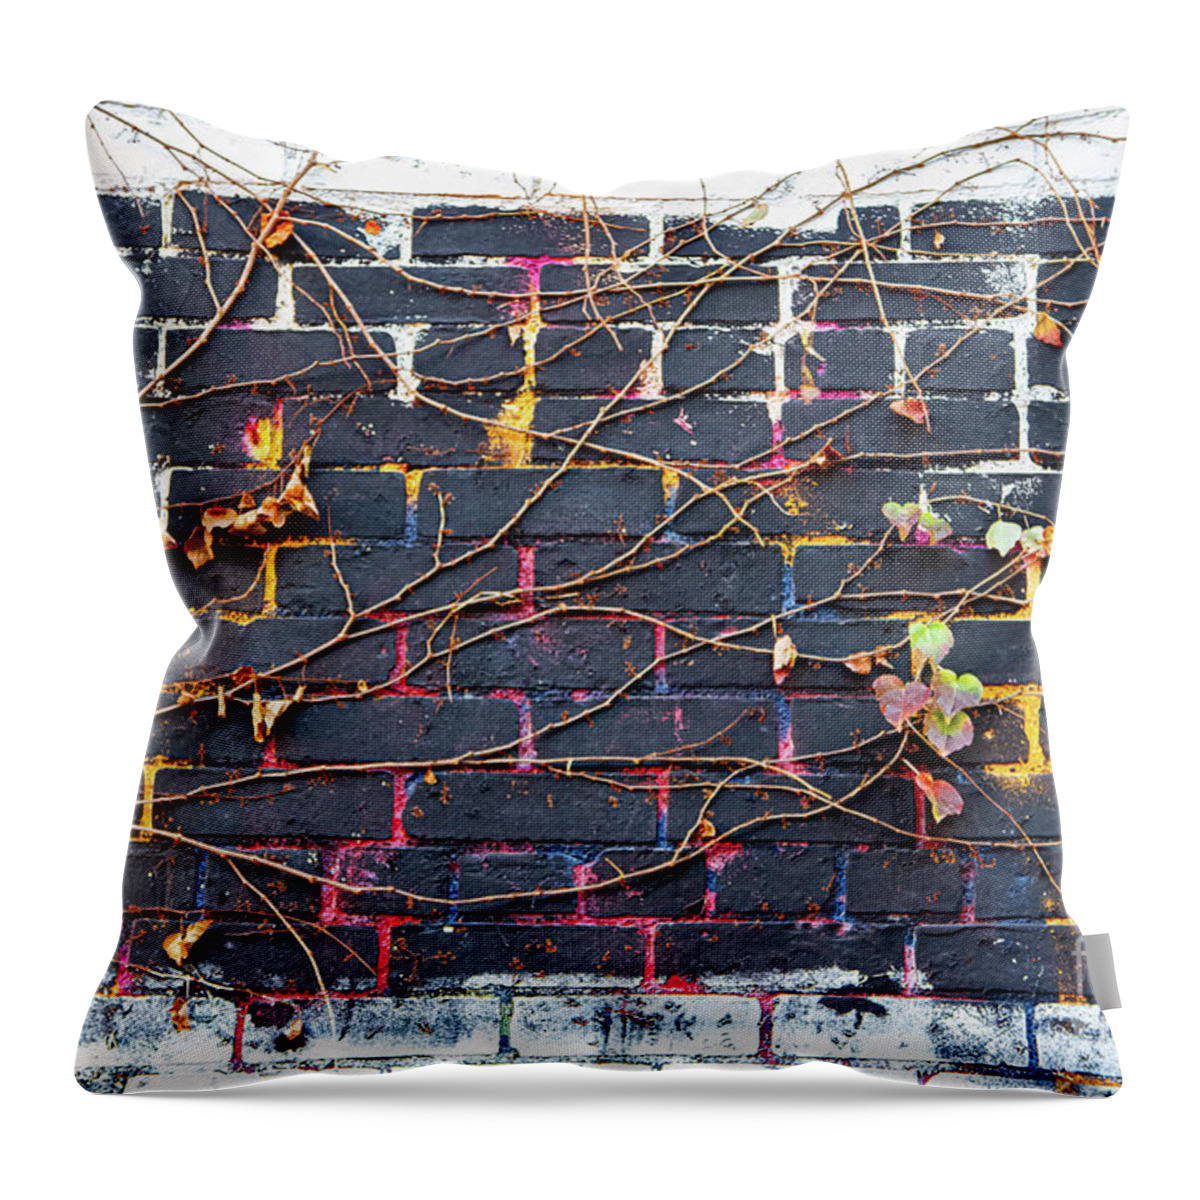 Abstracts Throw Pillow featuring the photograph The Underpainter by Marilyn Cornwell